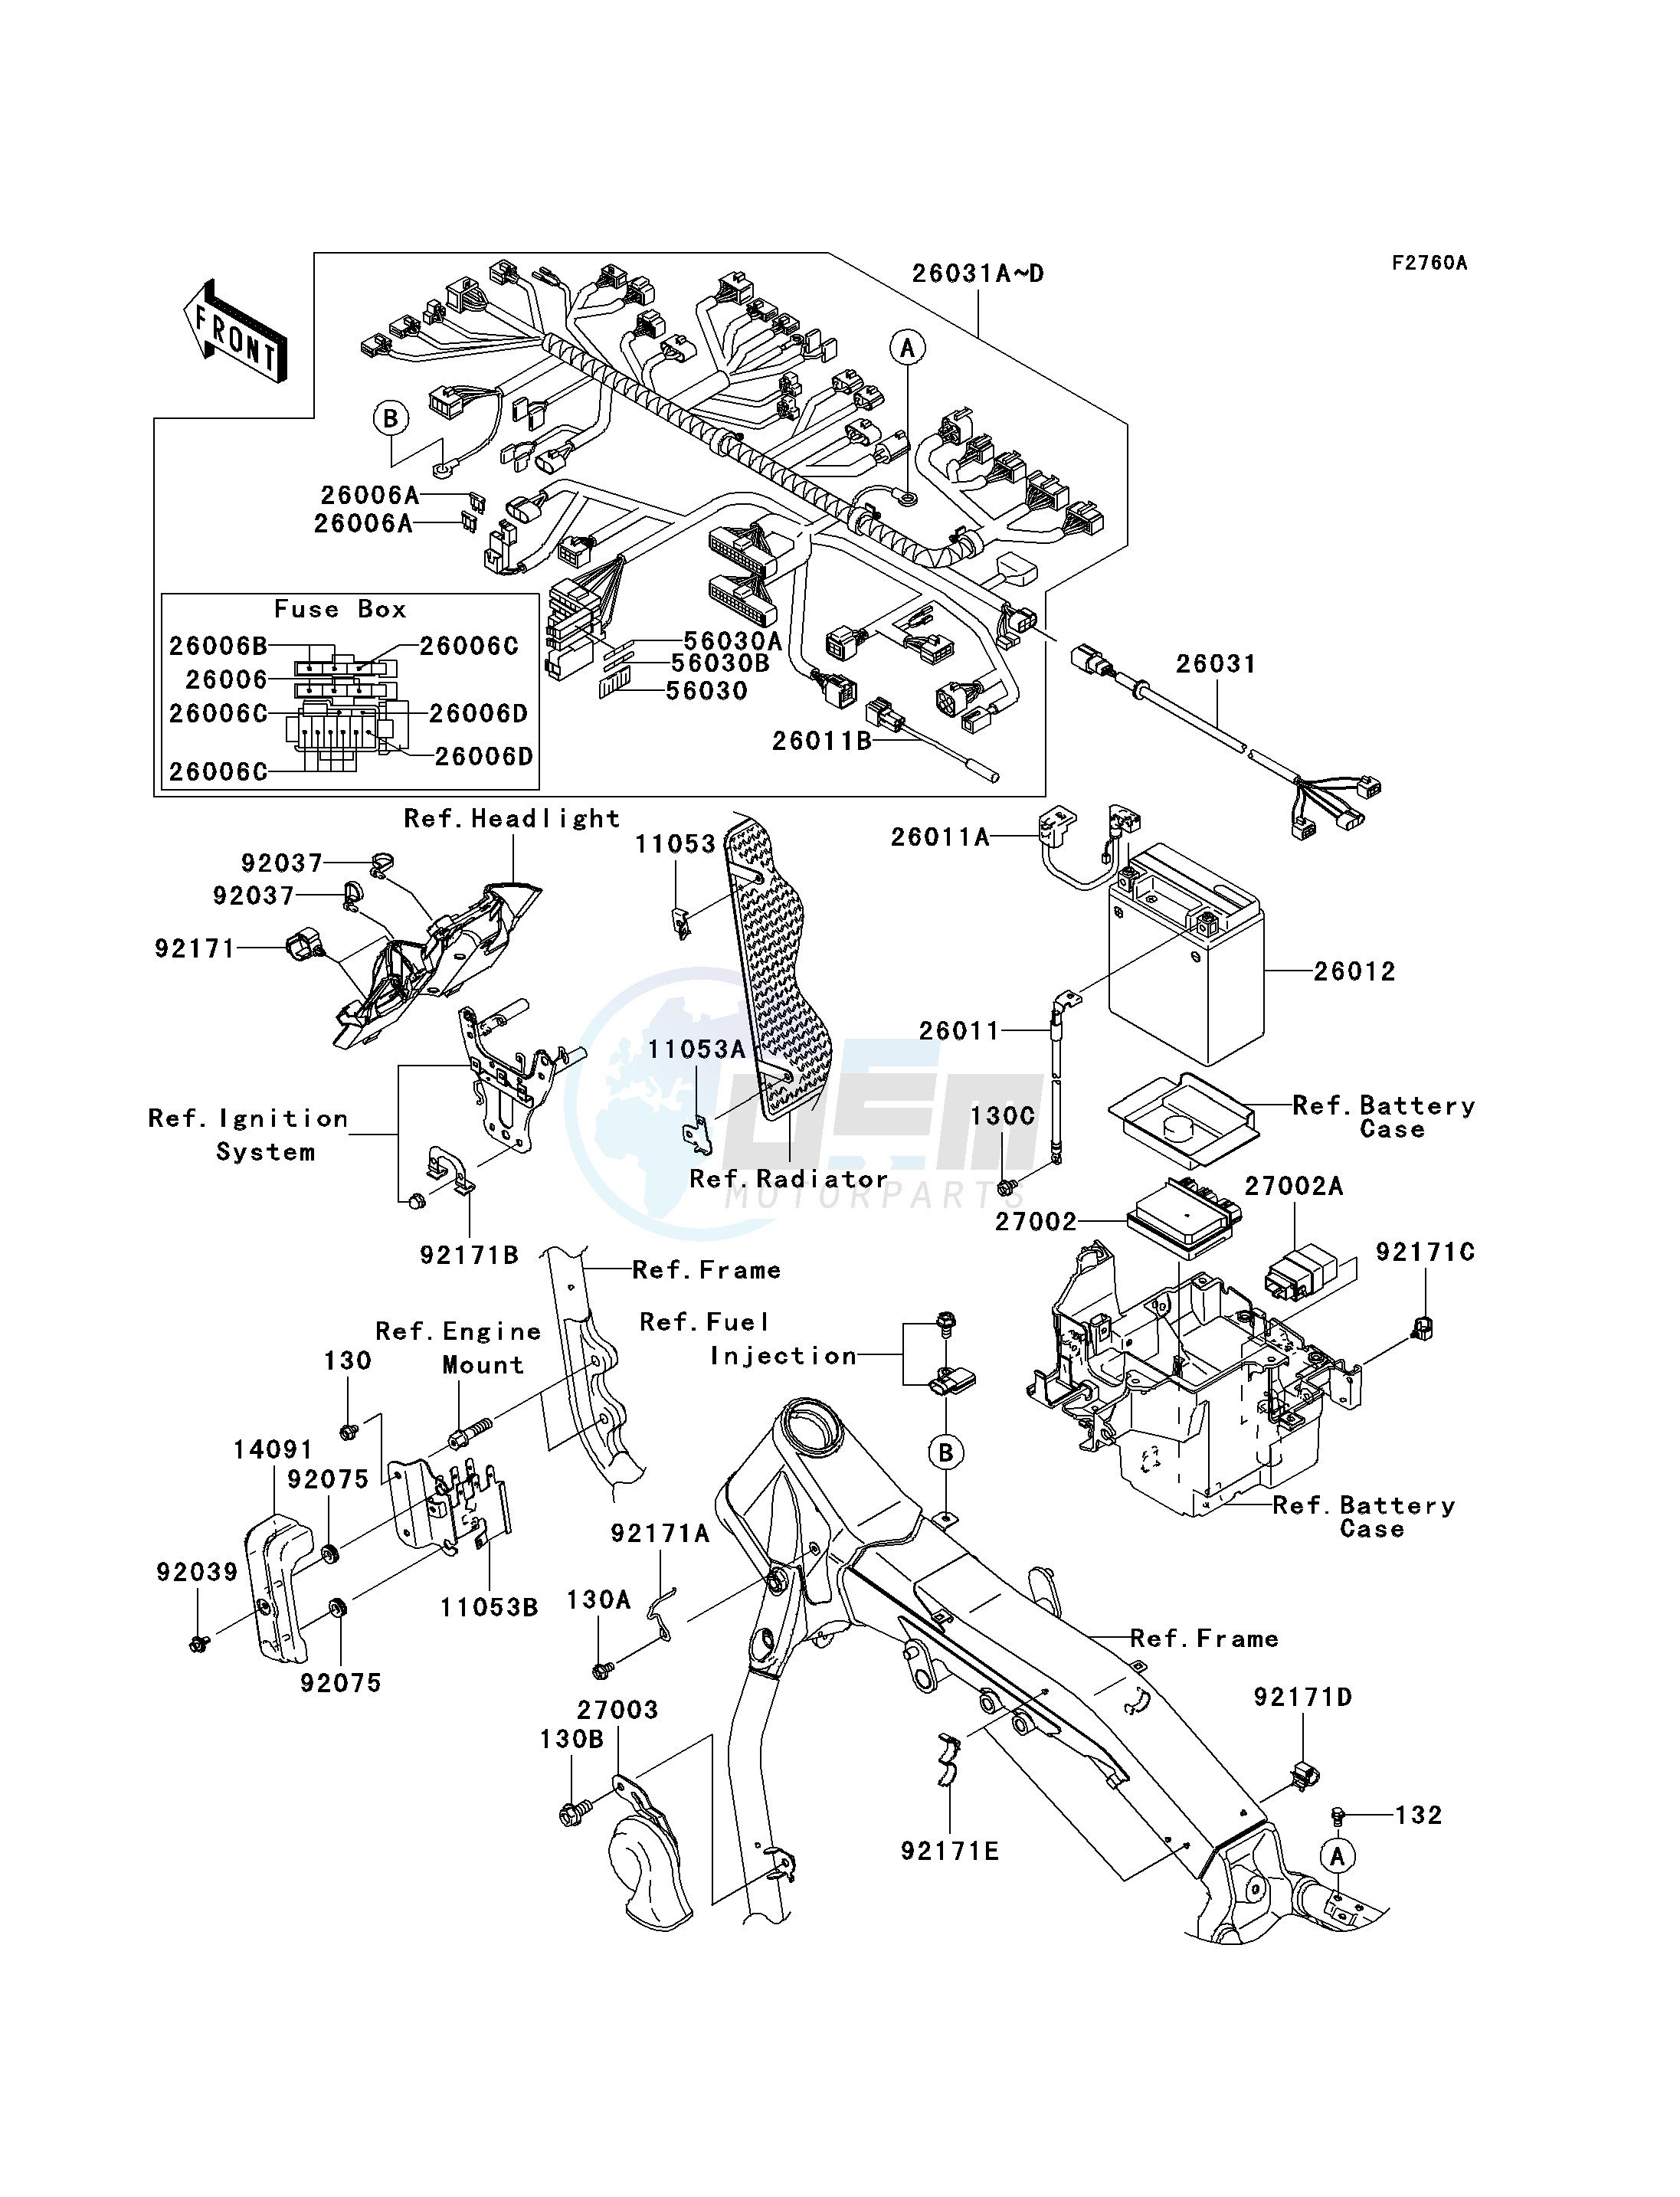 CHASSIS ELECTRICAL EQUIPMENT -- A2- - blueprint